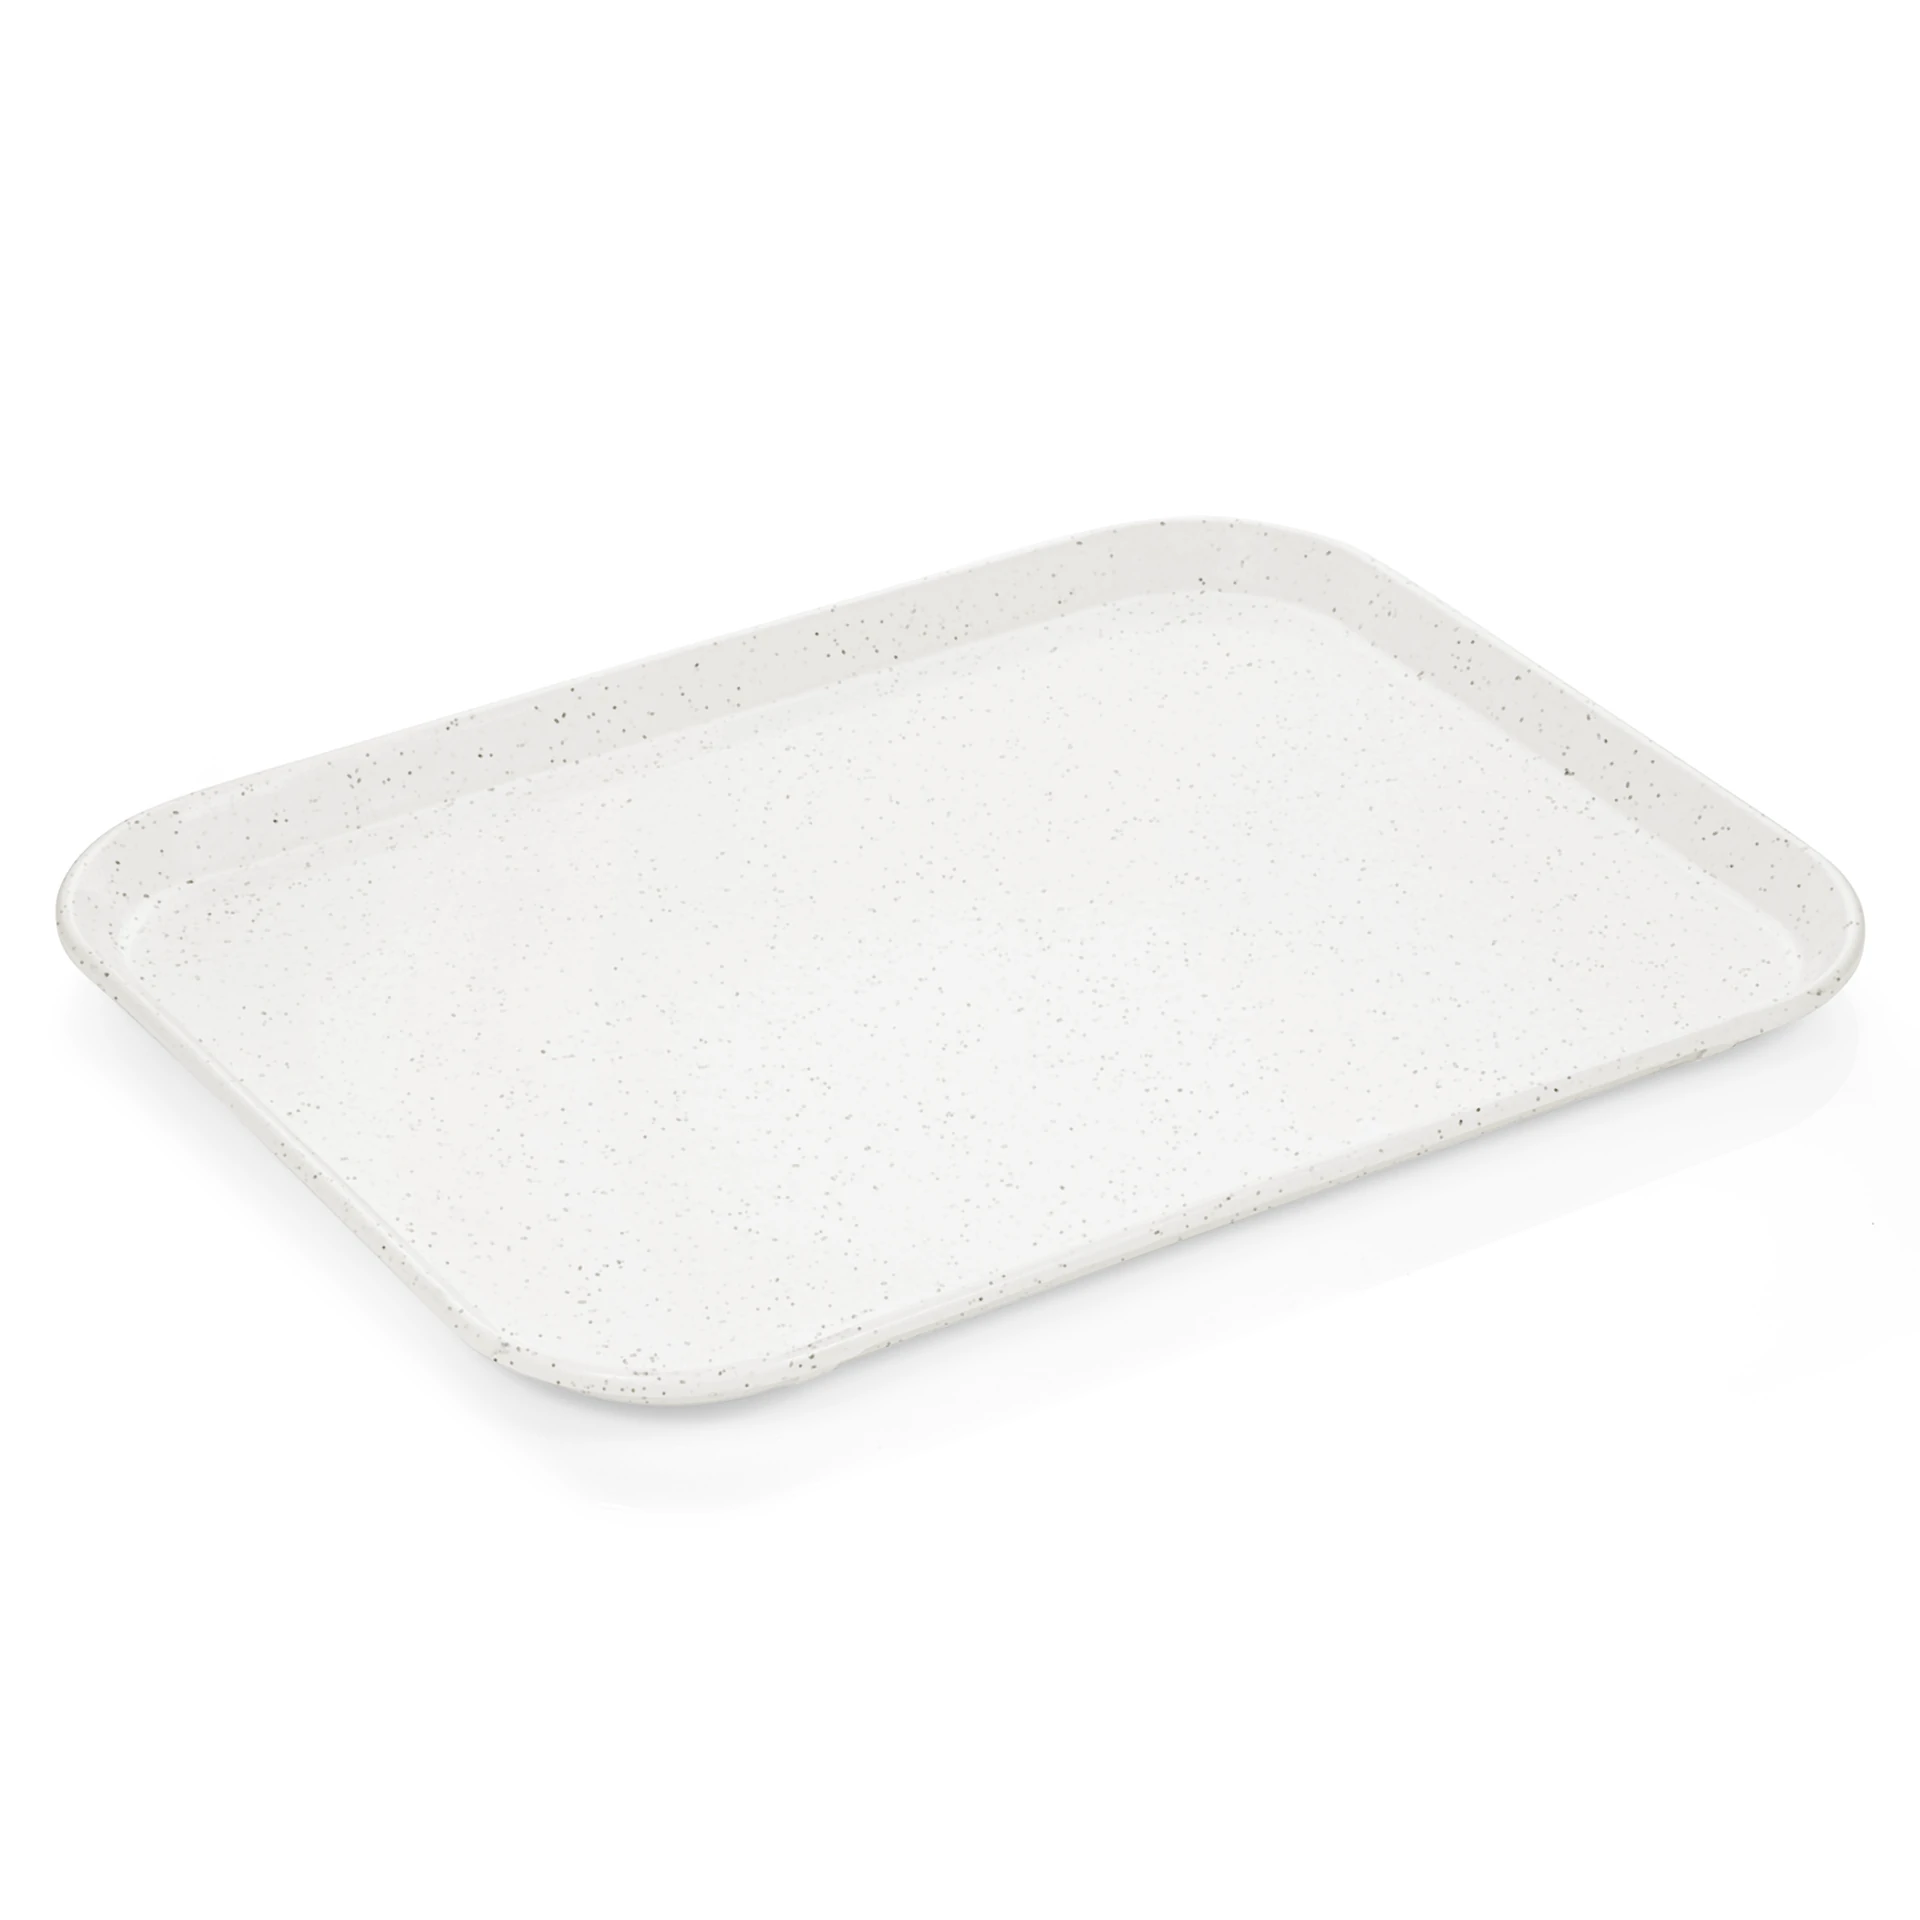 Tray Milky White With Small Dots